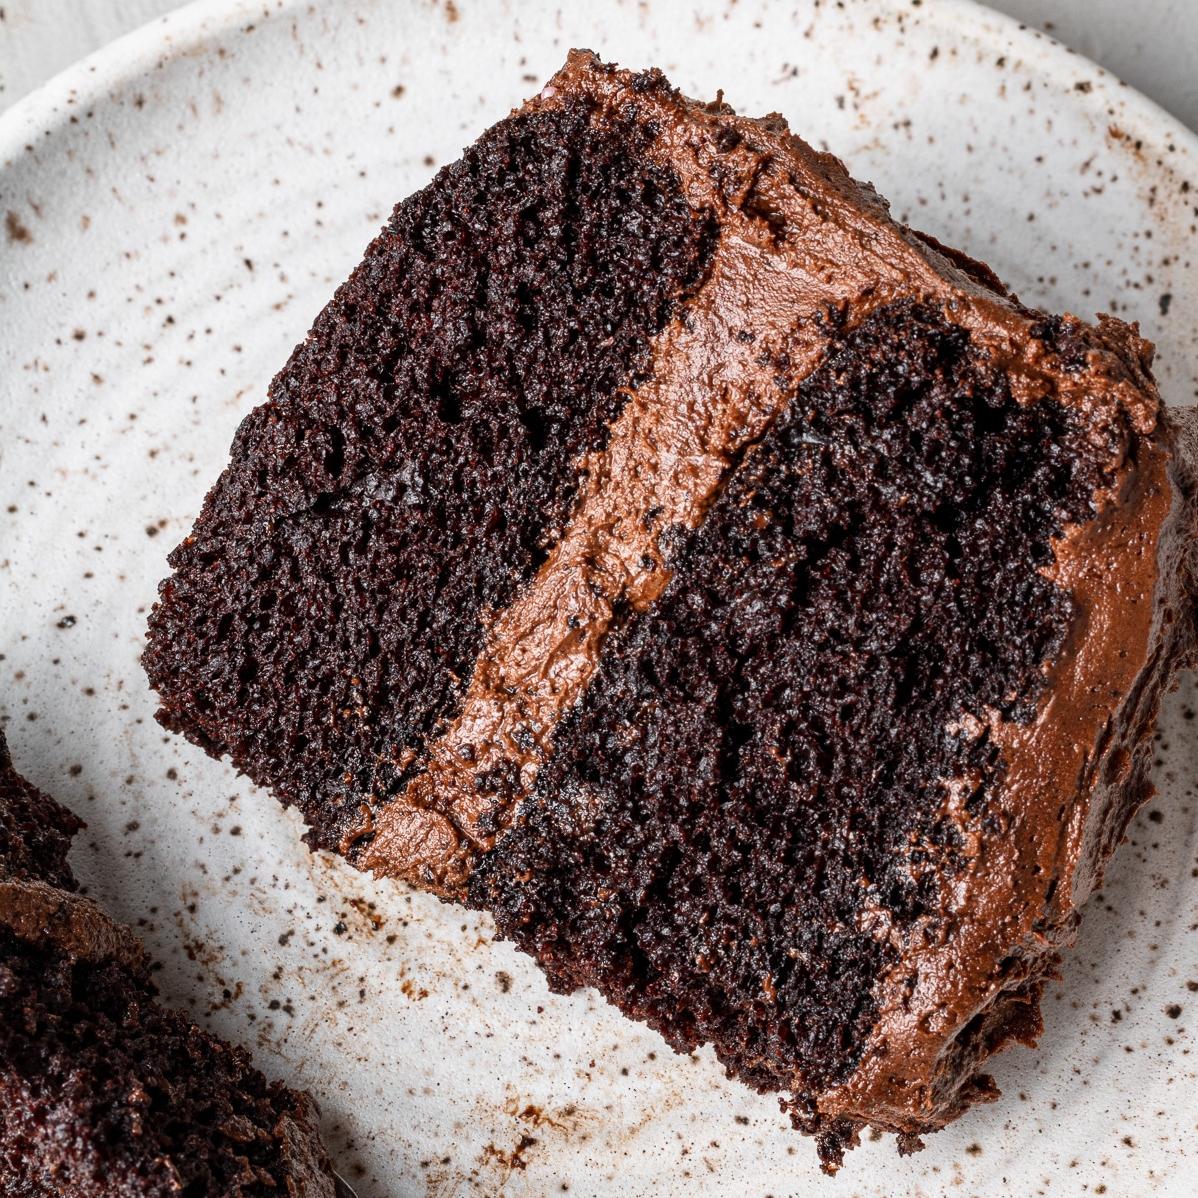  Indulge in a rich and decadent bite of our dairy-free chocolate cake!